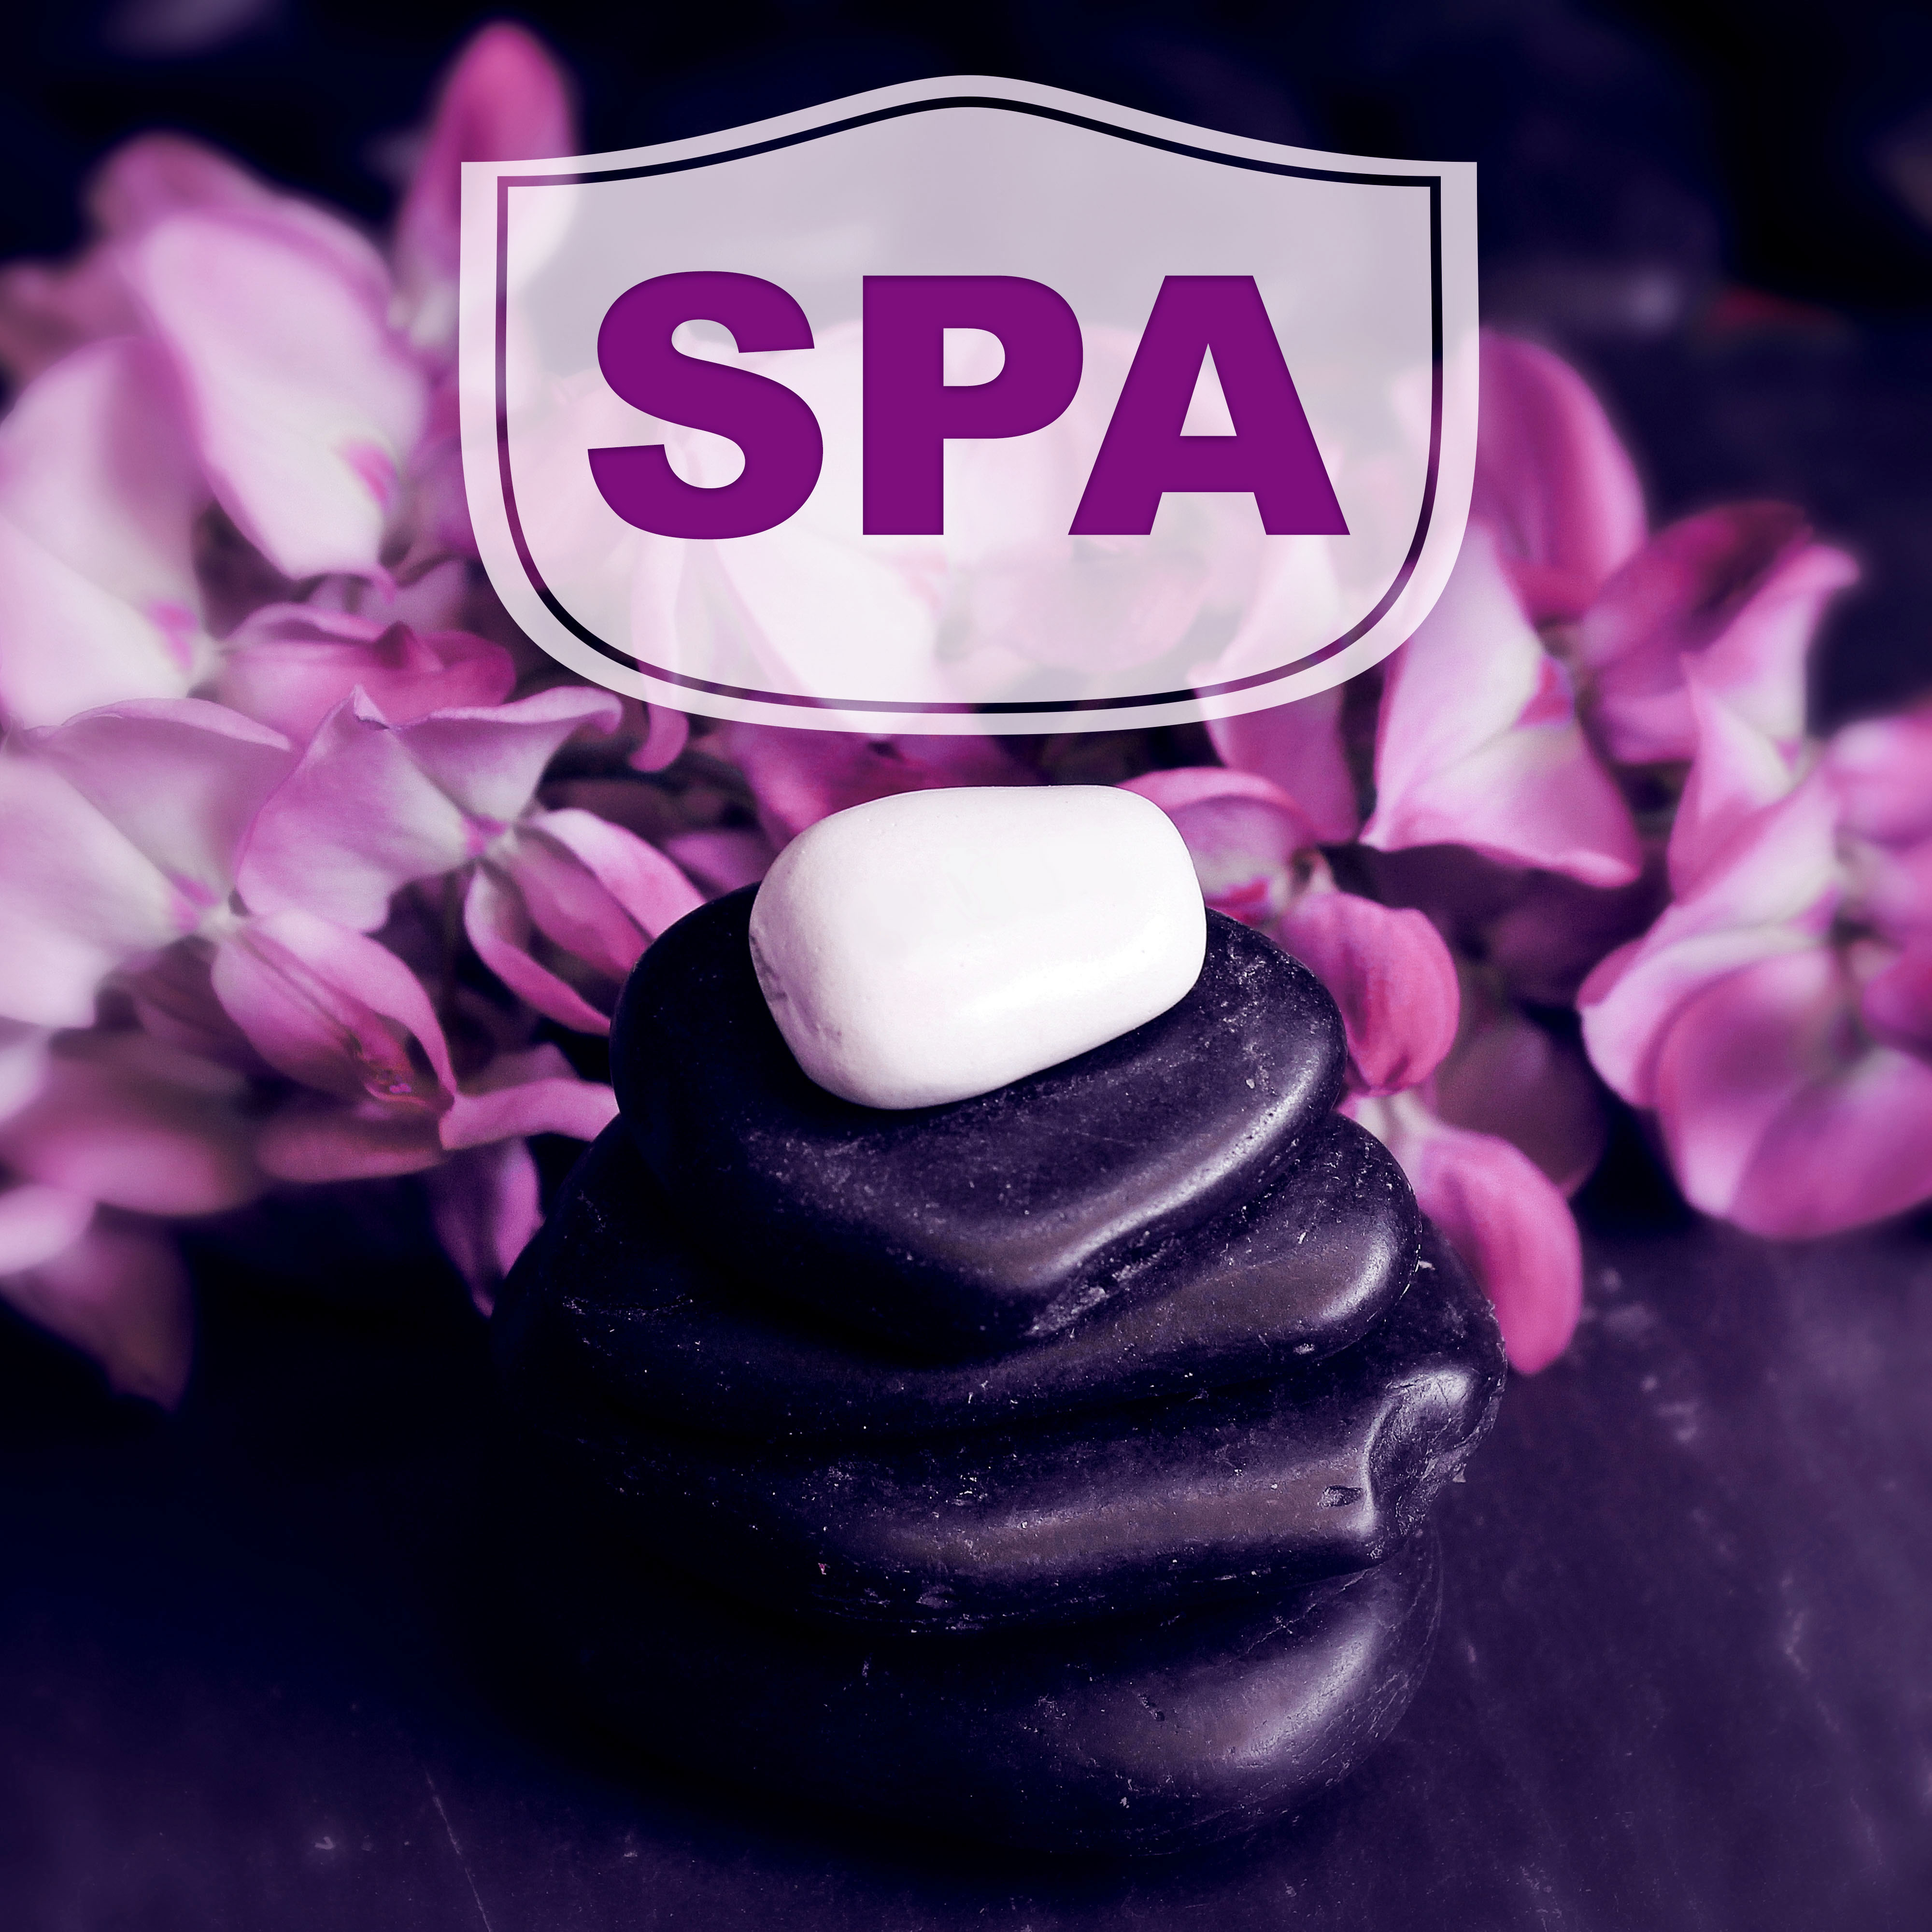 Spa  Gentle Sounds for Beauty Treatments, Peaceful Spa Music, Soothing Sounds, Wellness, Bliss Spa